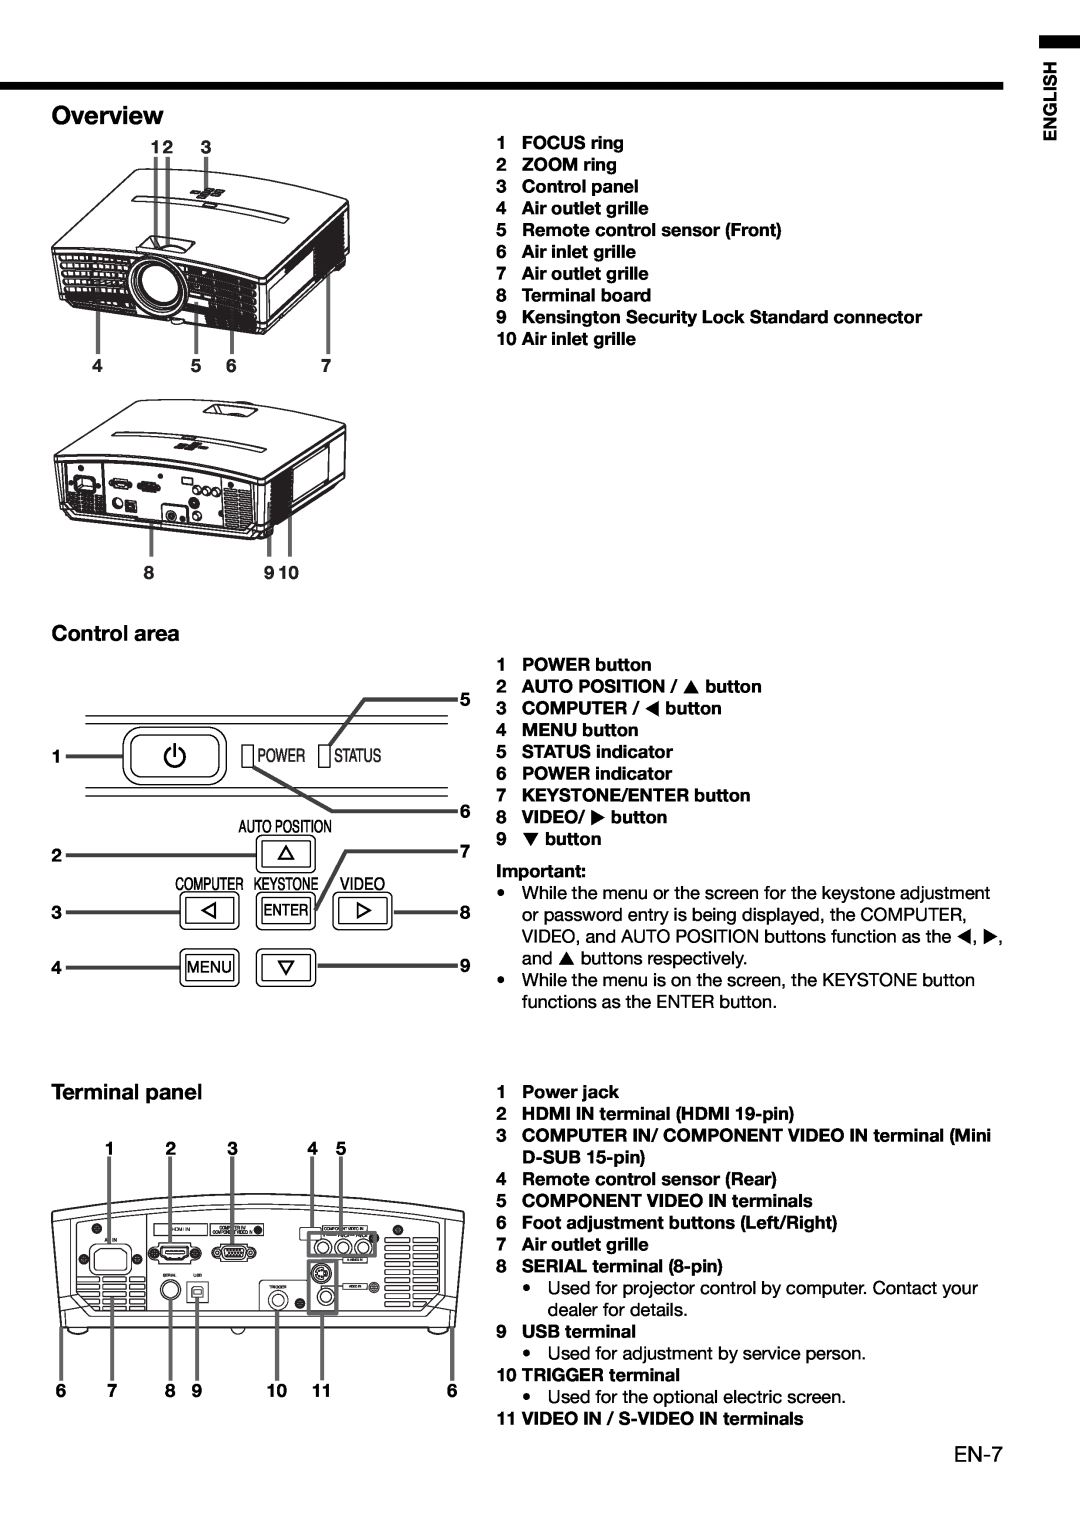 Mitsubishi Electronics HC3000 Overview, Control area, Terminal panel, Air inlet grille, POWER button, COMPUTER / button 